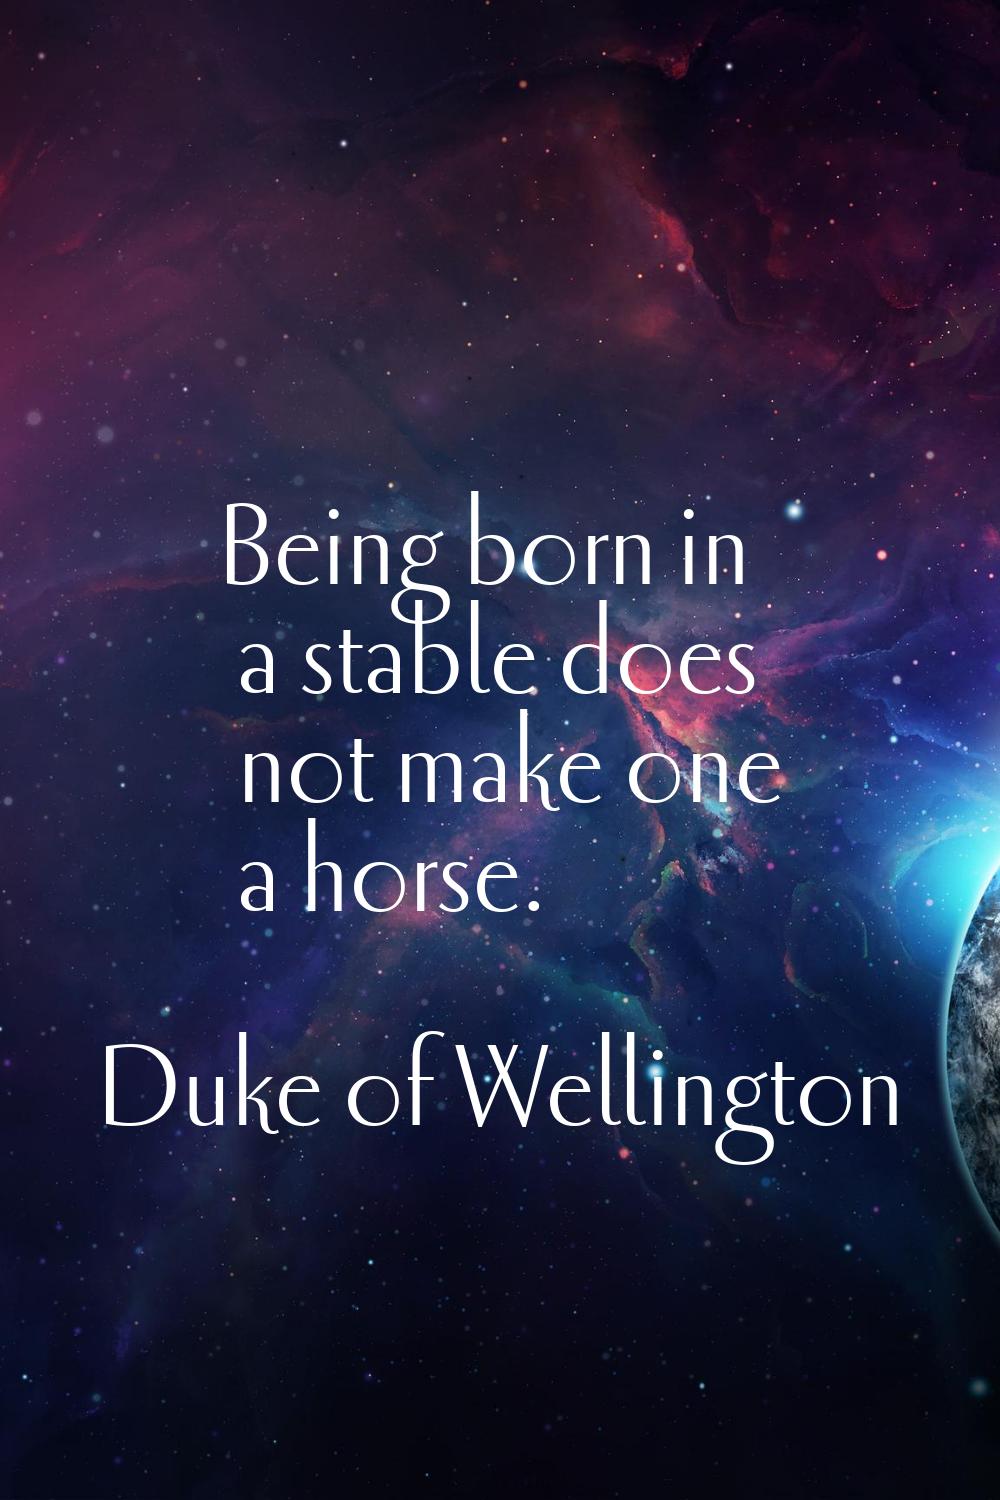 Being born in a stable does not make one a horse.